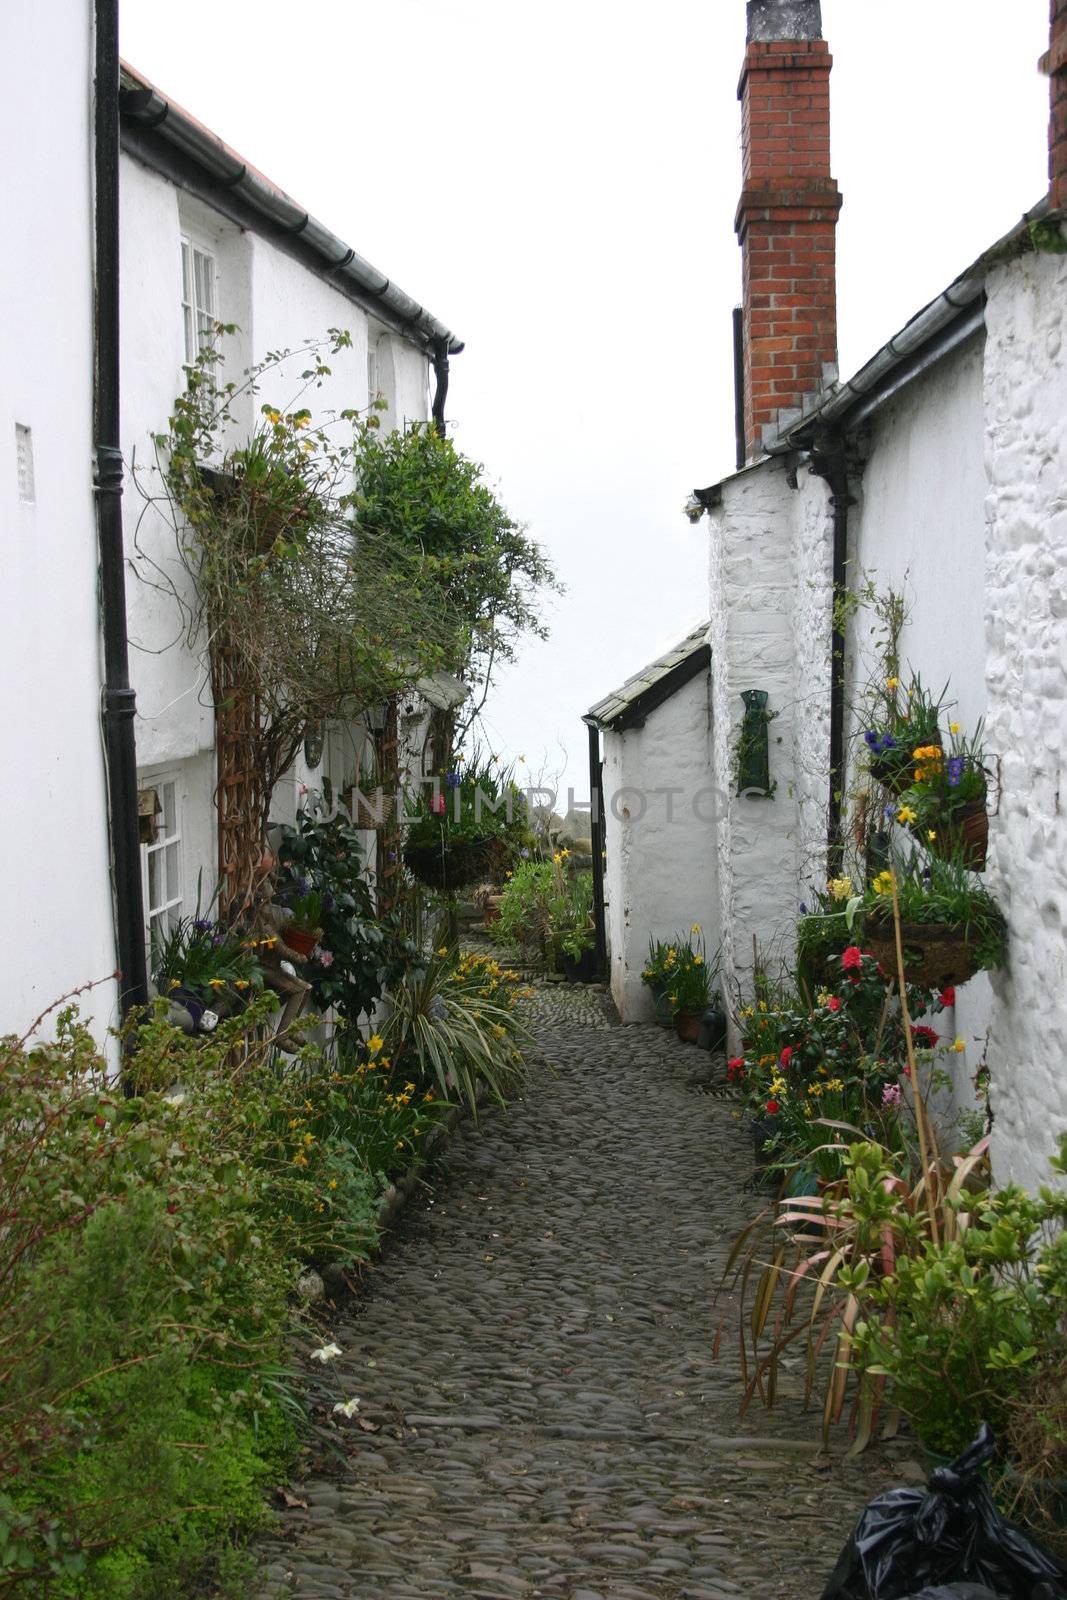 old cottaages with narrow cobble path between them decorated with flowers and shrubs